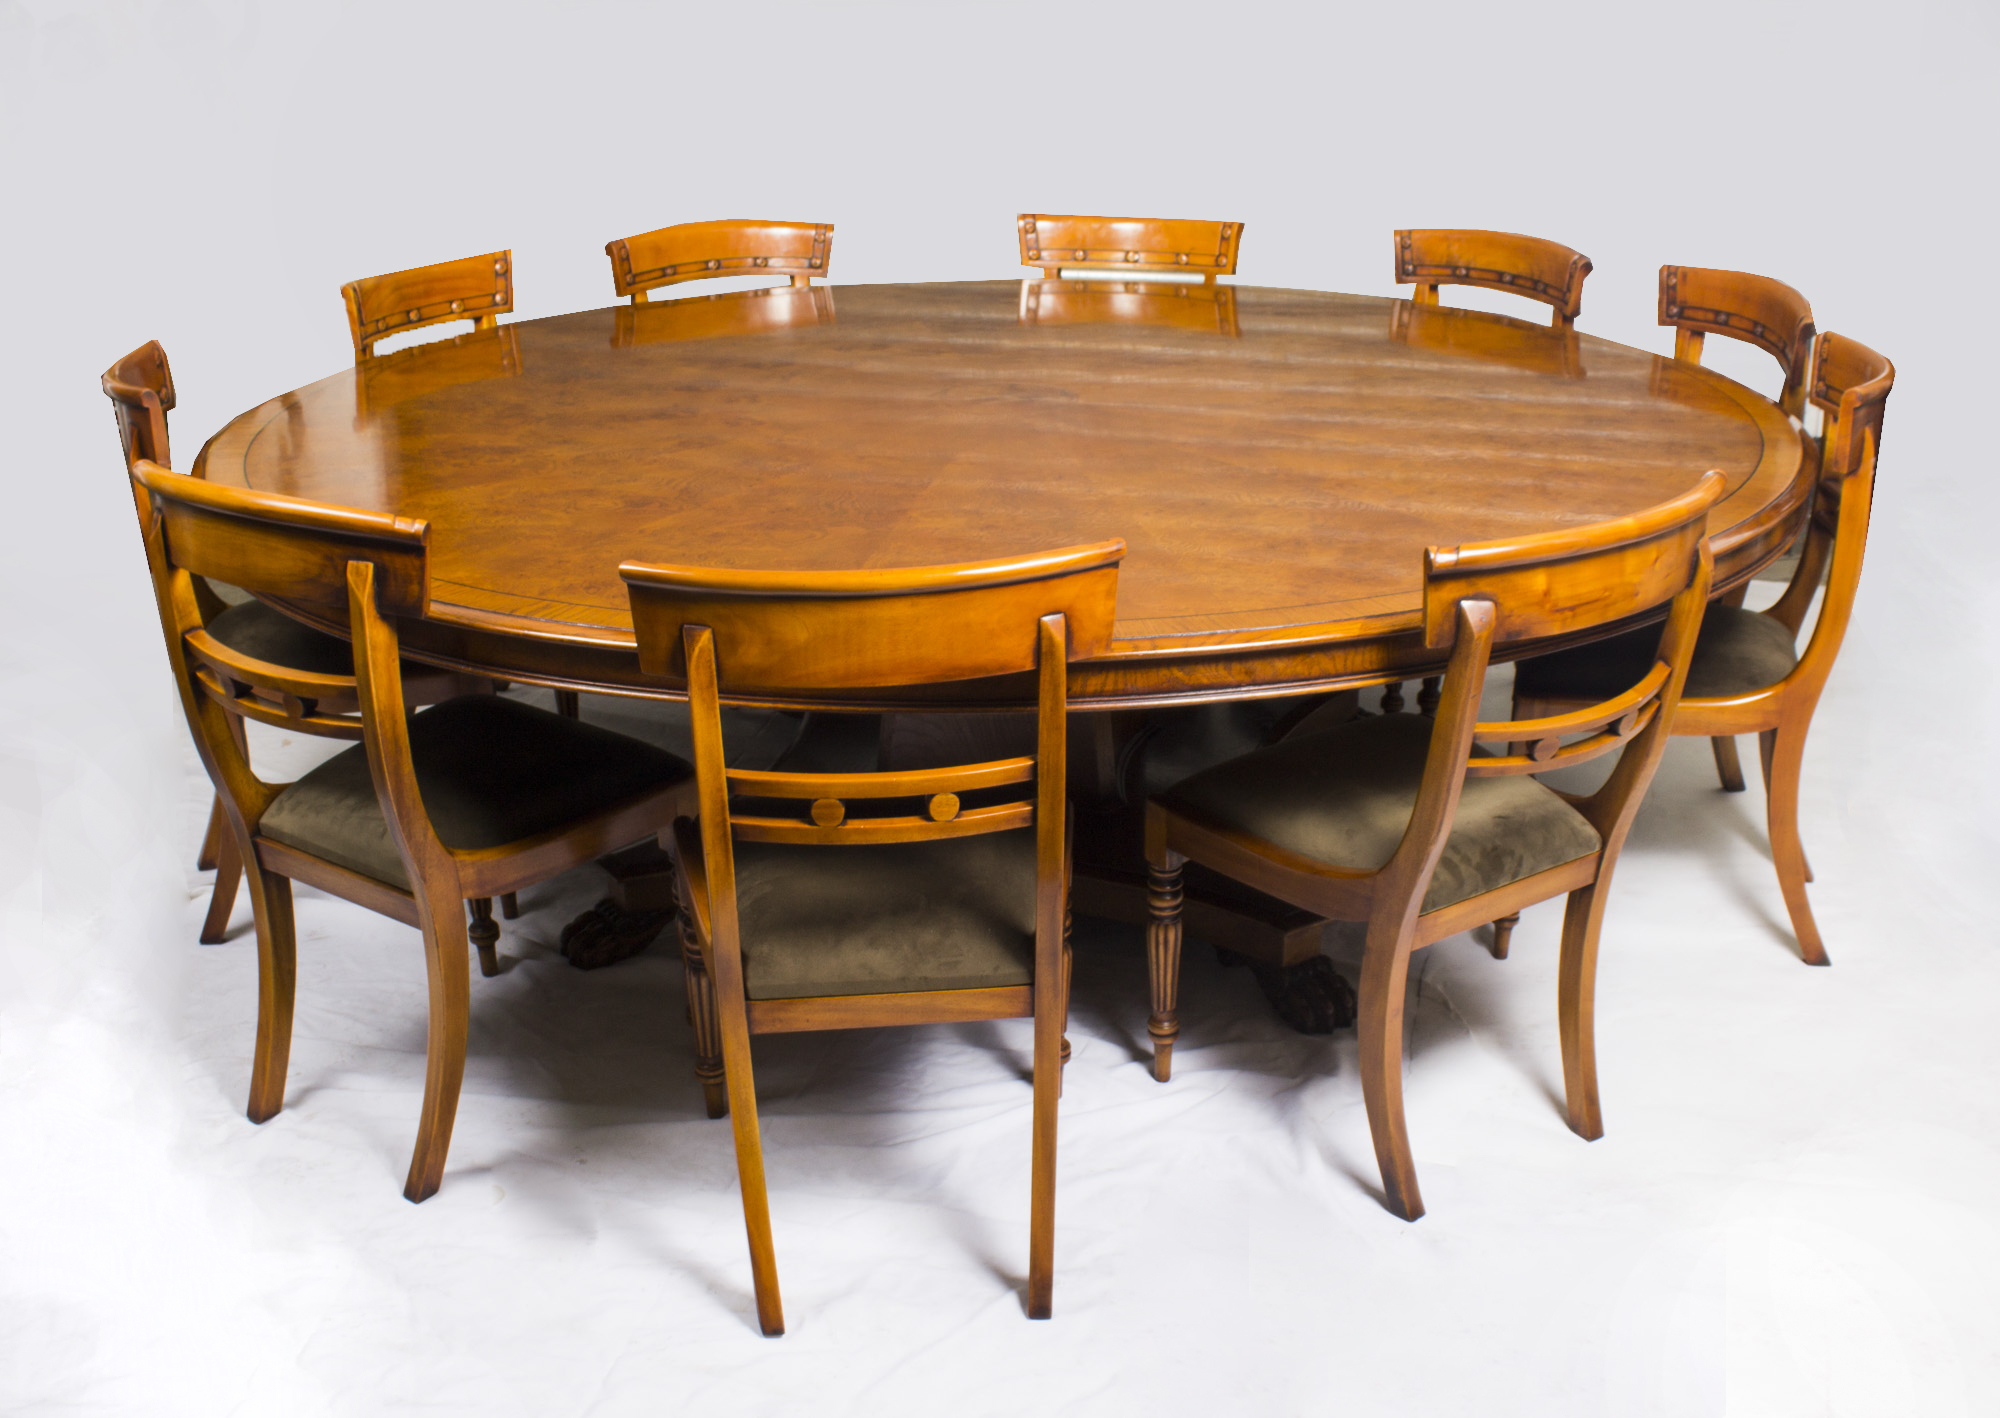 8 Foot Round Dining Room Table